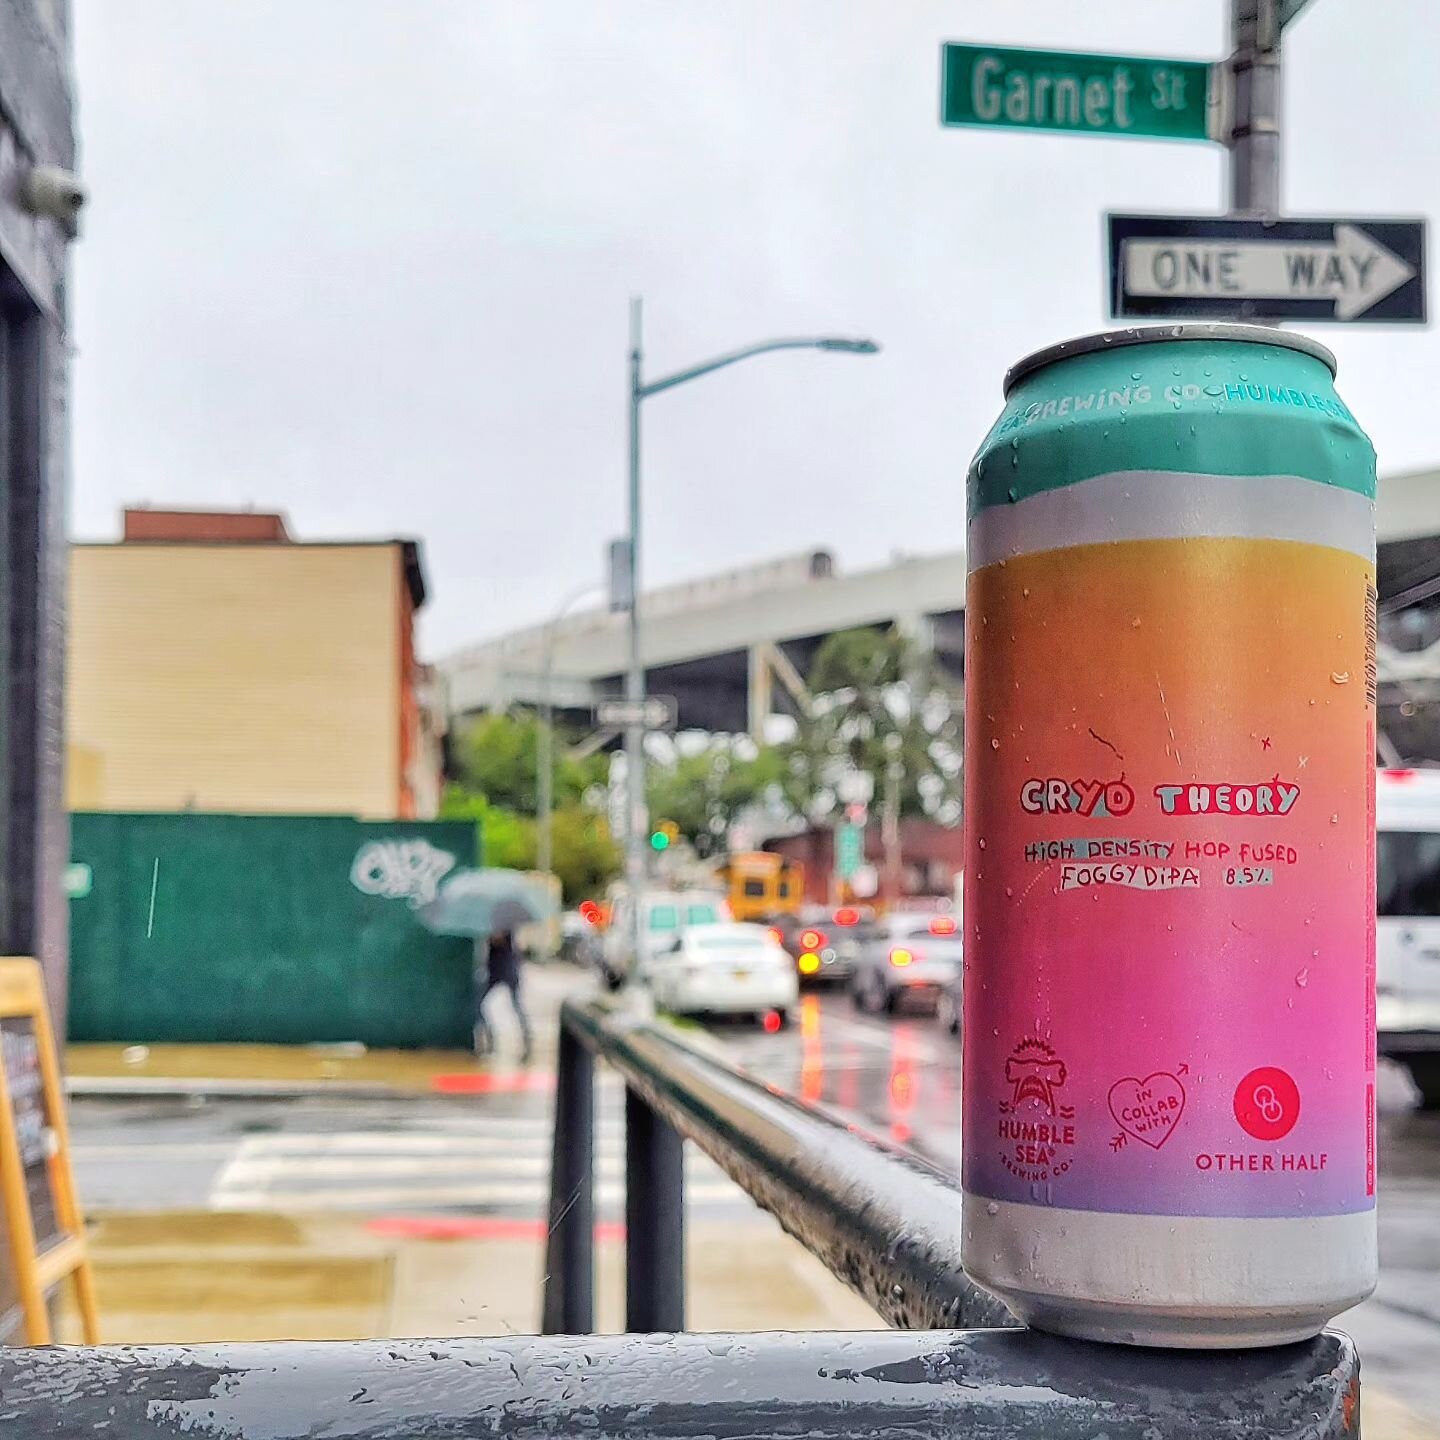 Added to Queue:

&quot;Cryo Theory&quot;
TDH Double New England IPA (8.5%)
@humblesea x @otherhalfnyc

We're bringing you this limited edition collaboration on this rainy day, as a well deserved treat for braving the torrential downpours in search of